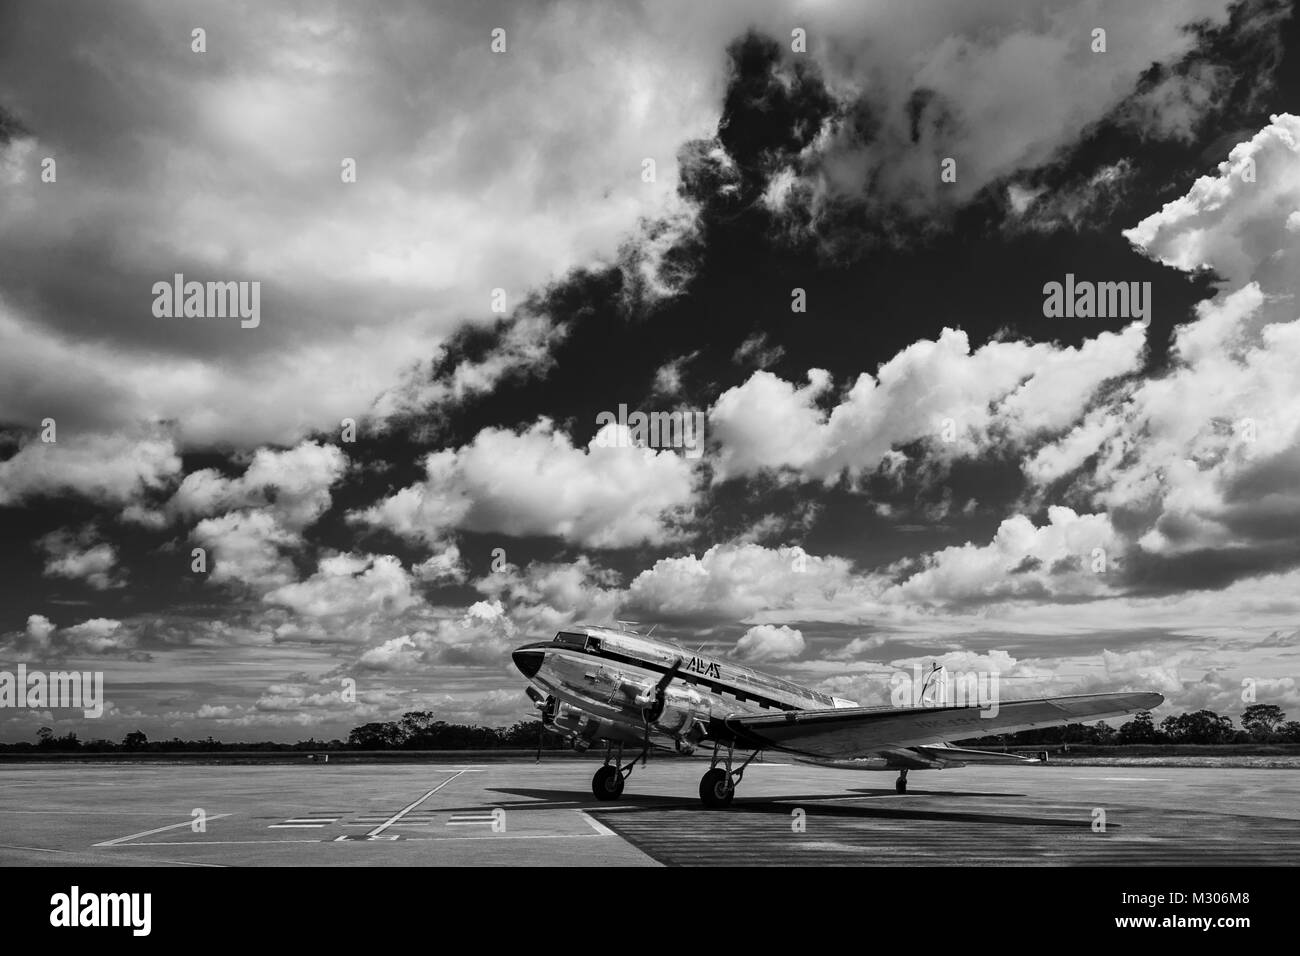 A Douglas DC-3 aircraft taxis on the runway before taking off at the airport of Villavicencio, Colombia. Stock Photo